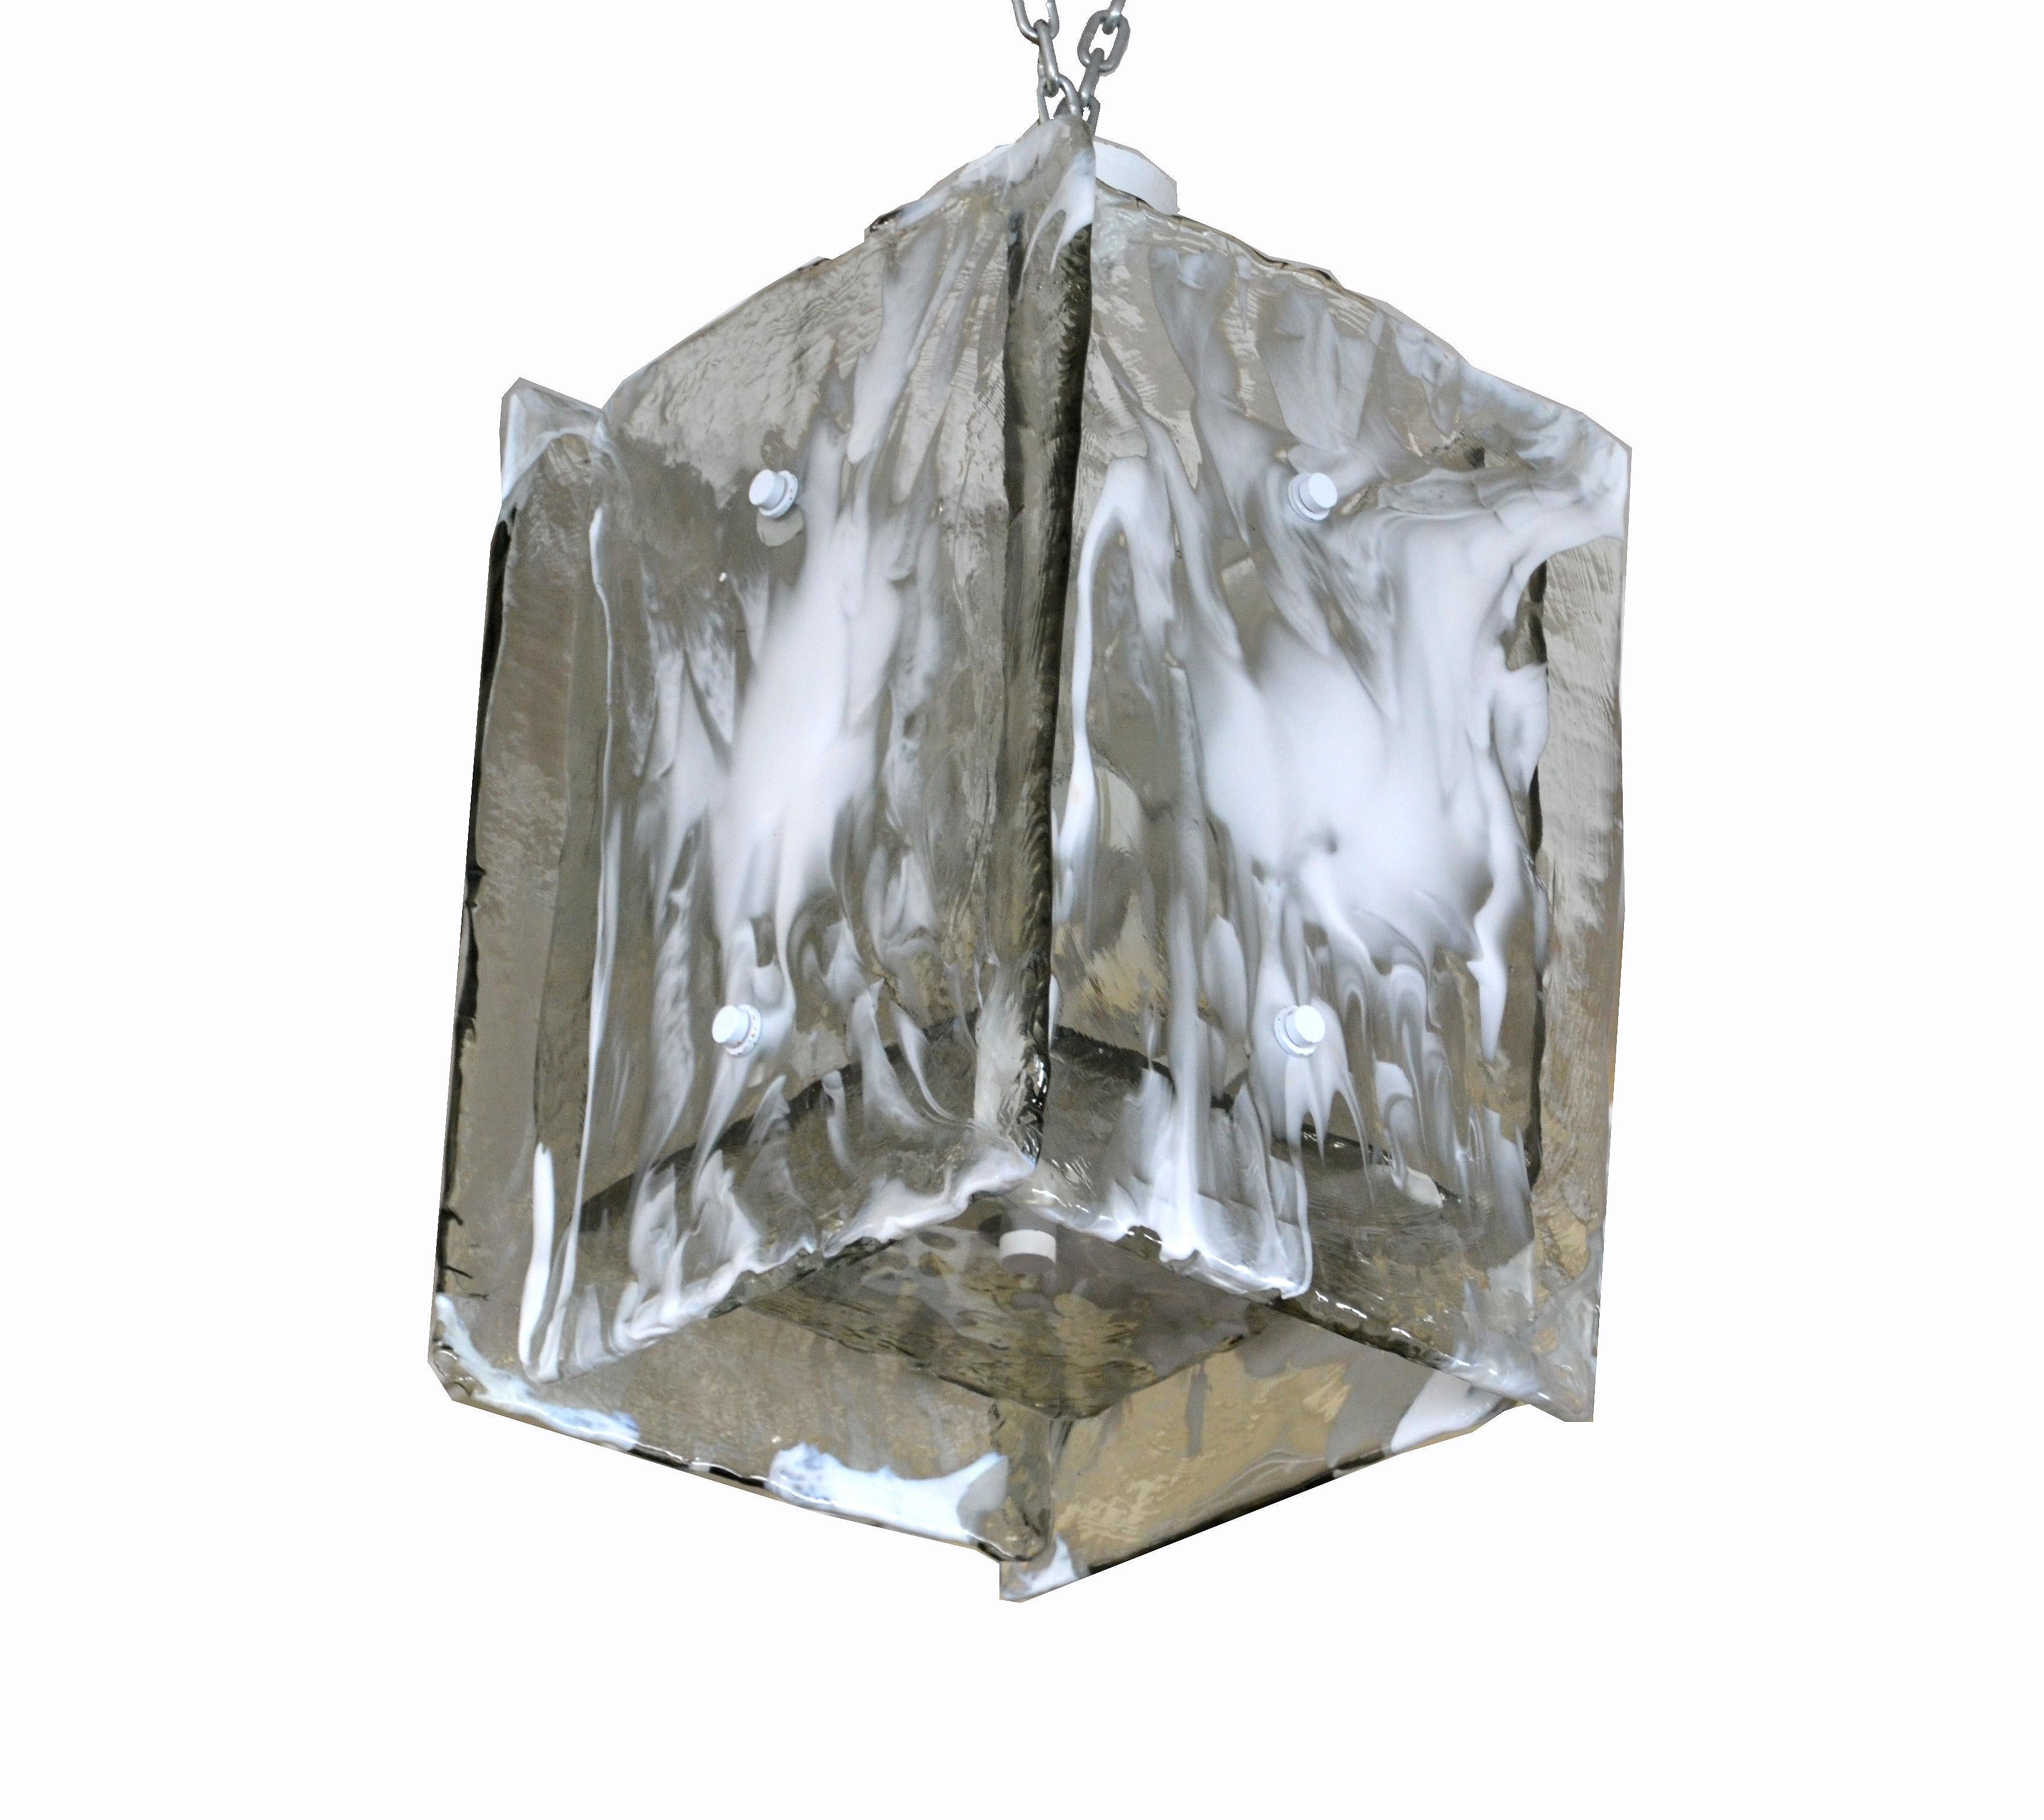 Mid-Century Modern Italian Murano art glass textured chandelier by Carlo Nason for Mazzega.
5 transparent and white textured Murano glass panels are mounted to a metal frame with 8 candelabra light bulbs.
Wired for the US and takes 8 candelabra